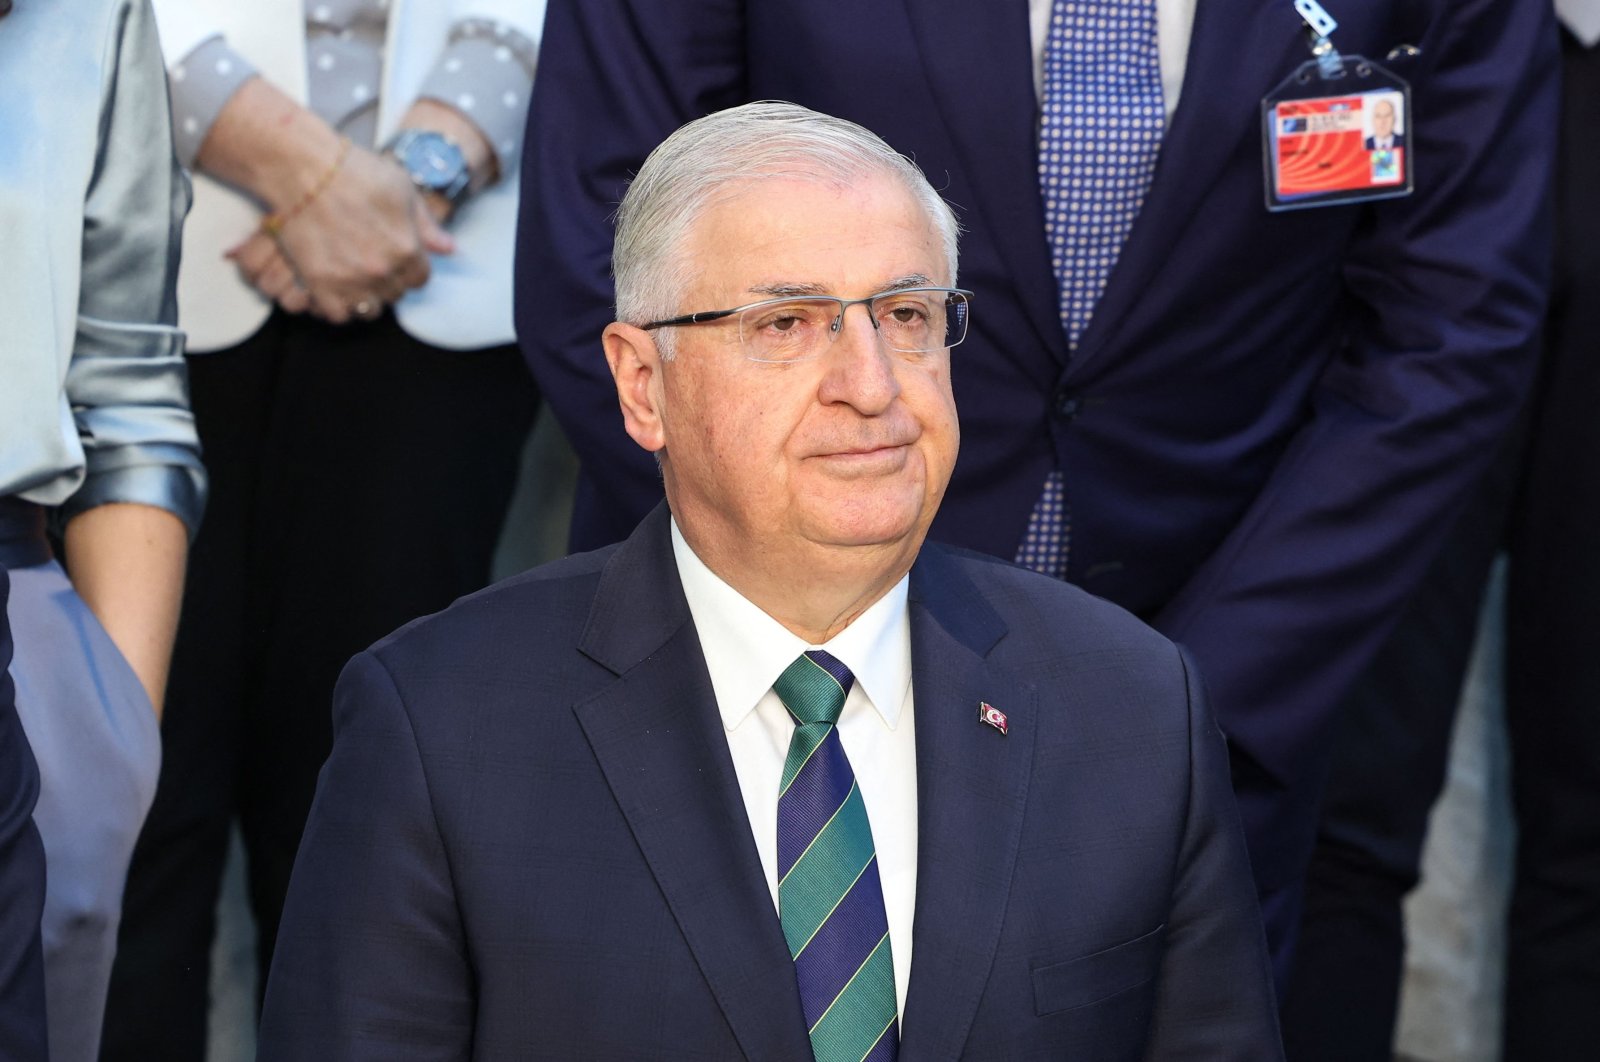 Defense Minister Yaşar Güler looks on as he poses for an official photograph at the NATO headquarters in Brussels, on June 16, 2023, during a two-day meeting of the North Atlantic Council (NAC) at the level of Defence Ministers on 15-16 June 2023. (AFP Photo)